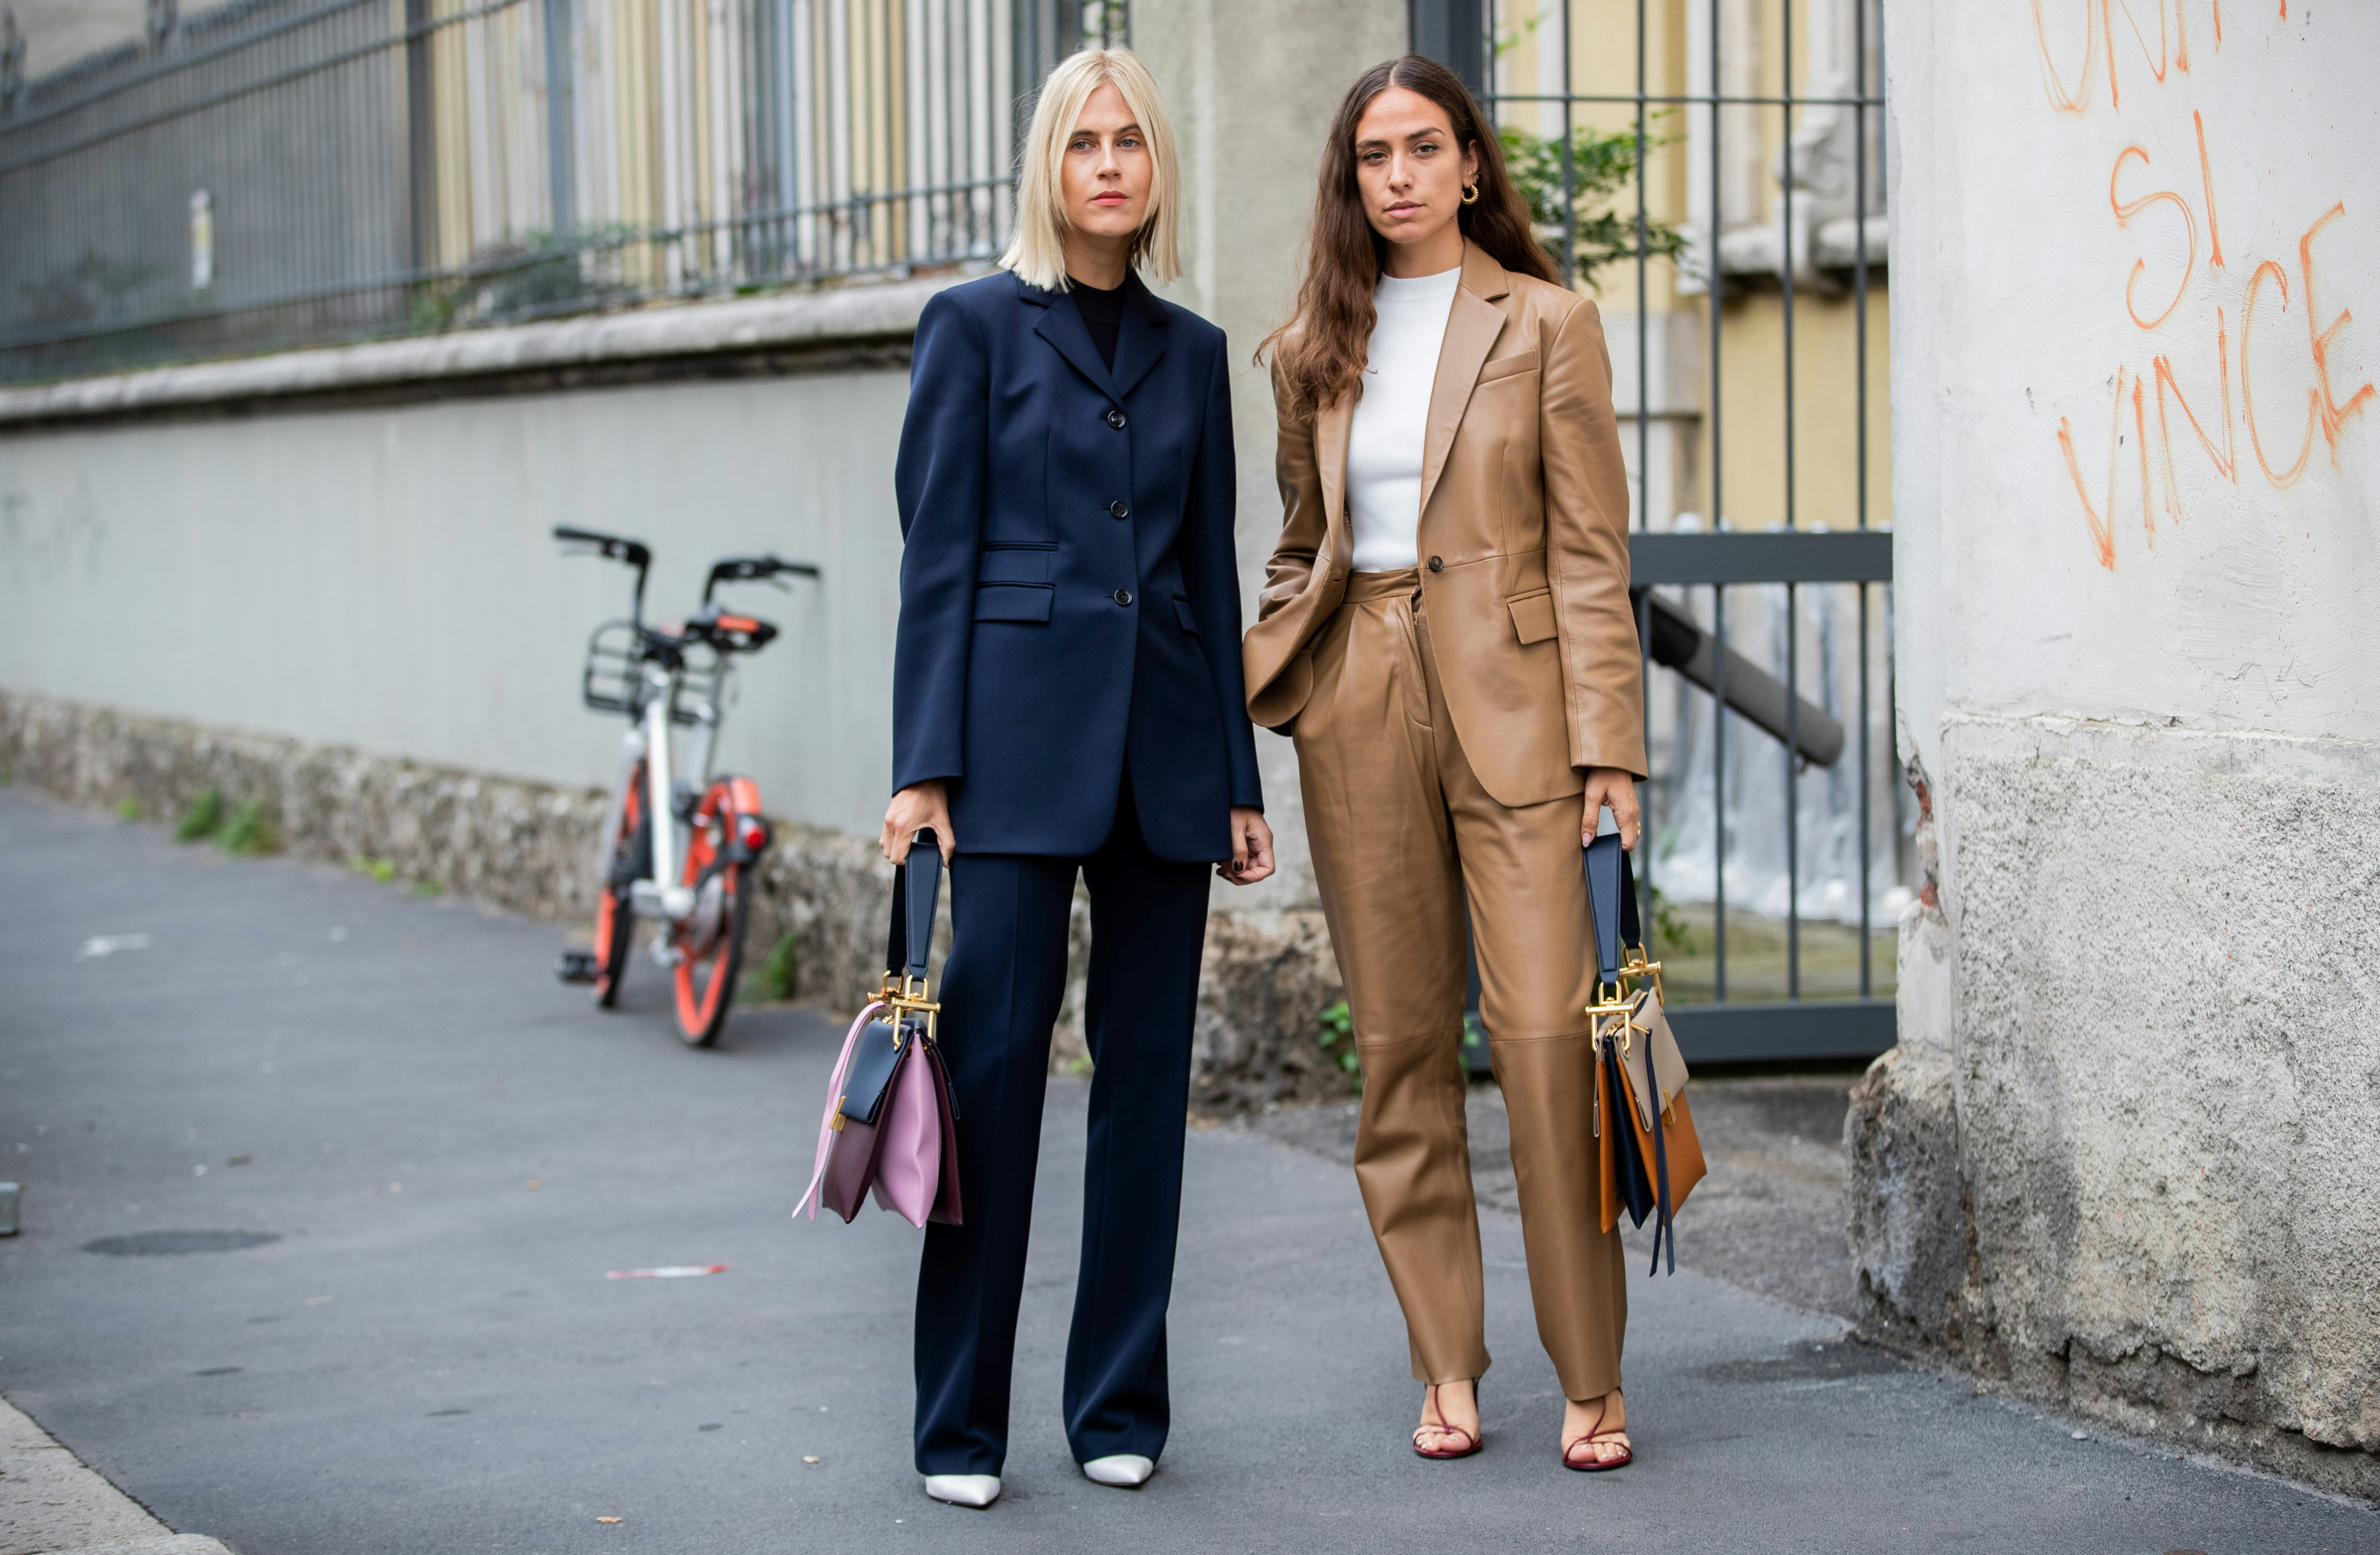 Power dressing: 7 easy ways to nail the trend - from sharp blazers